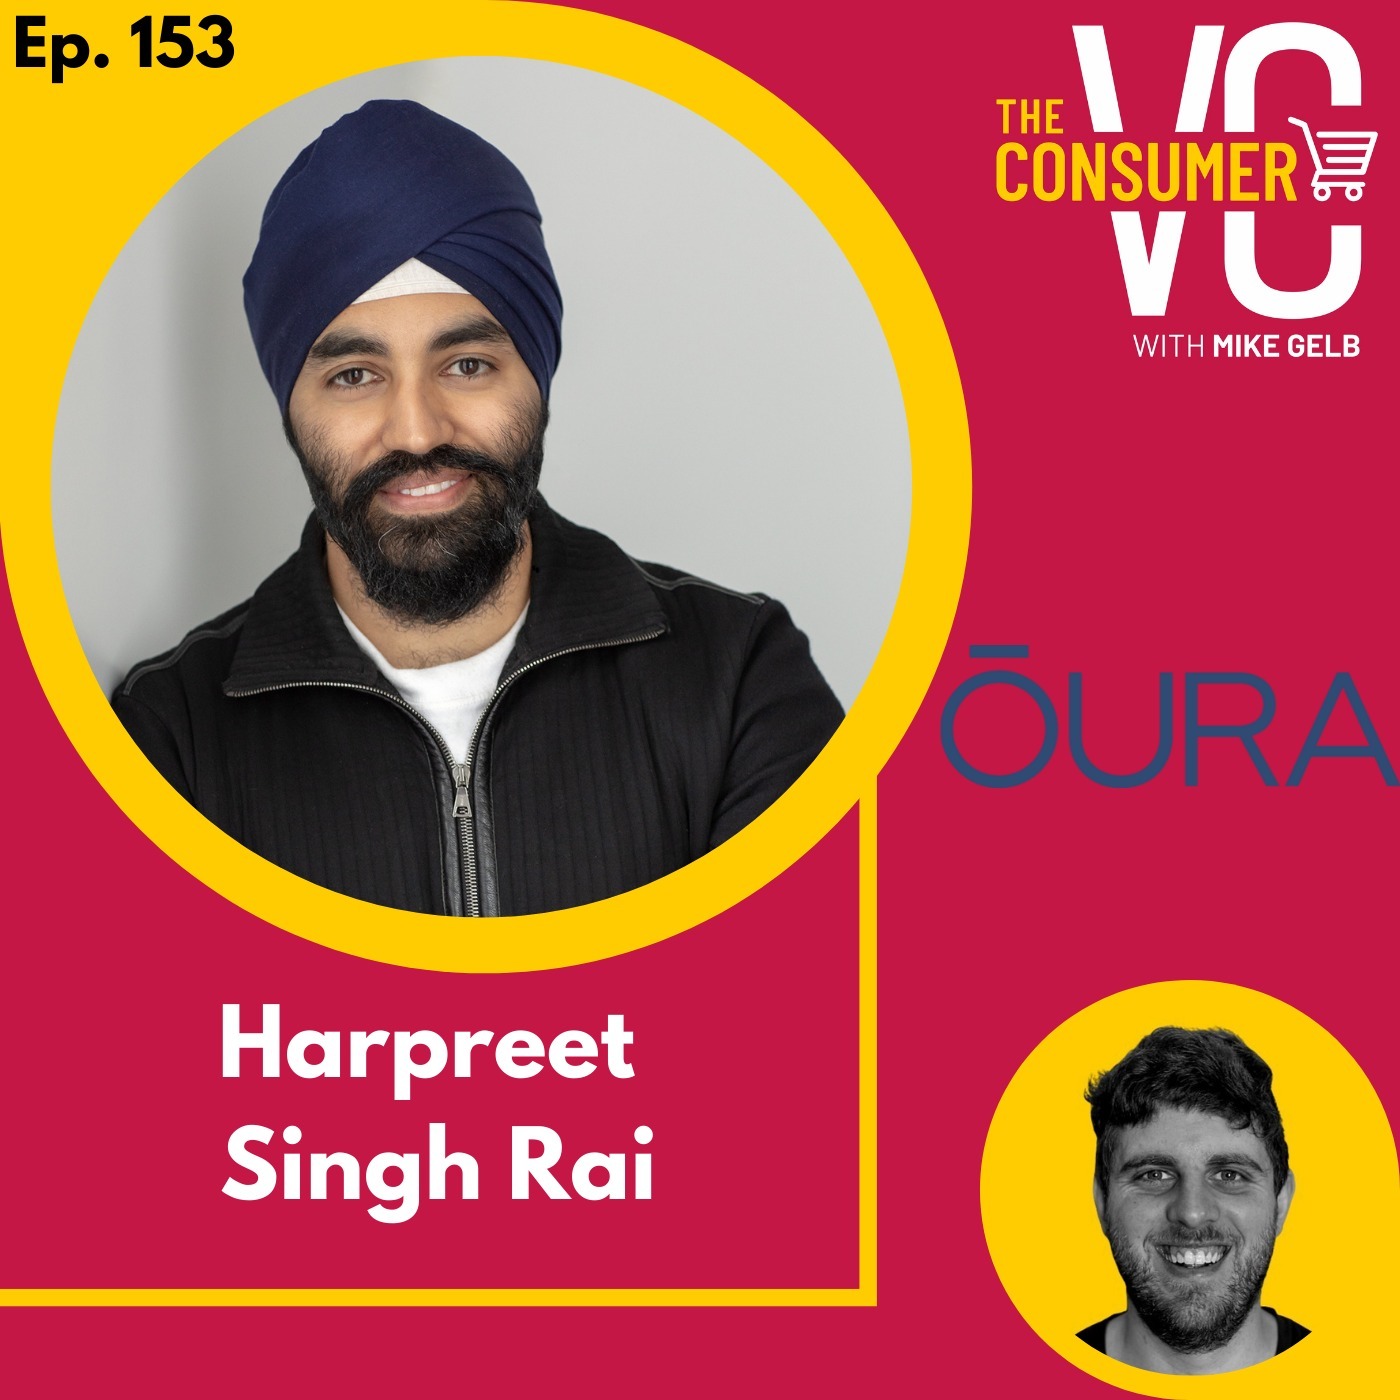 Harpreet Singh Rai (Oura) - How to improve your sleep and why we should track it